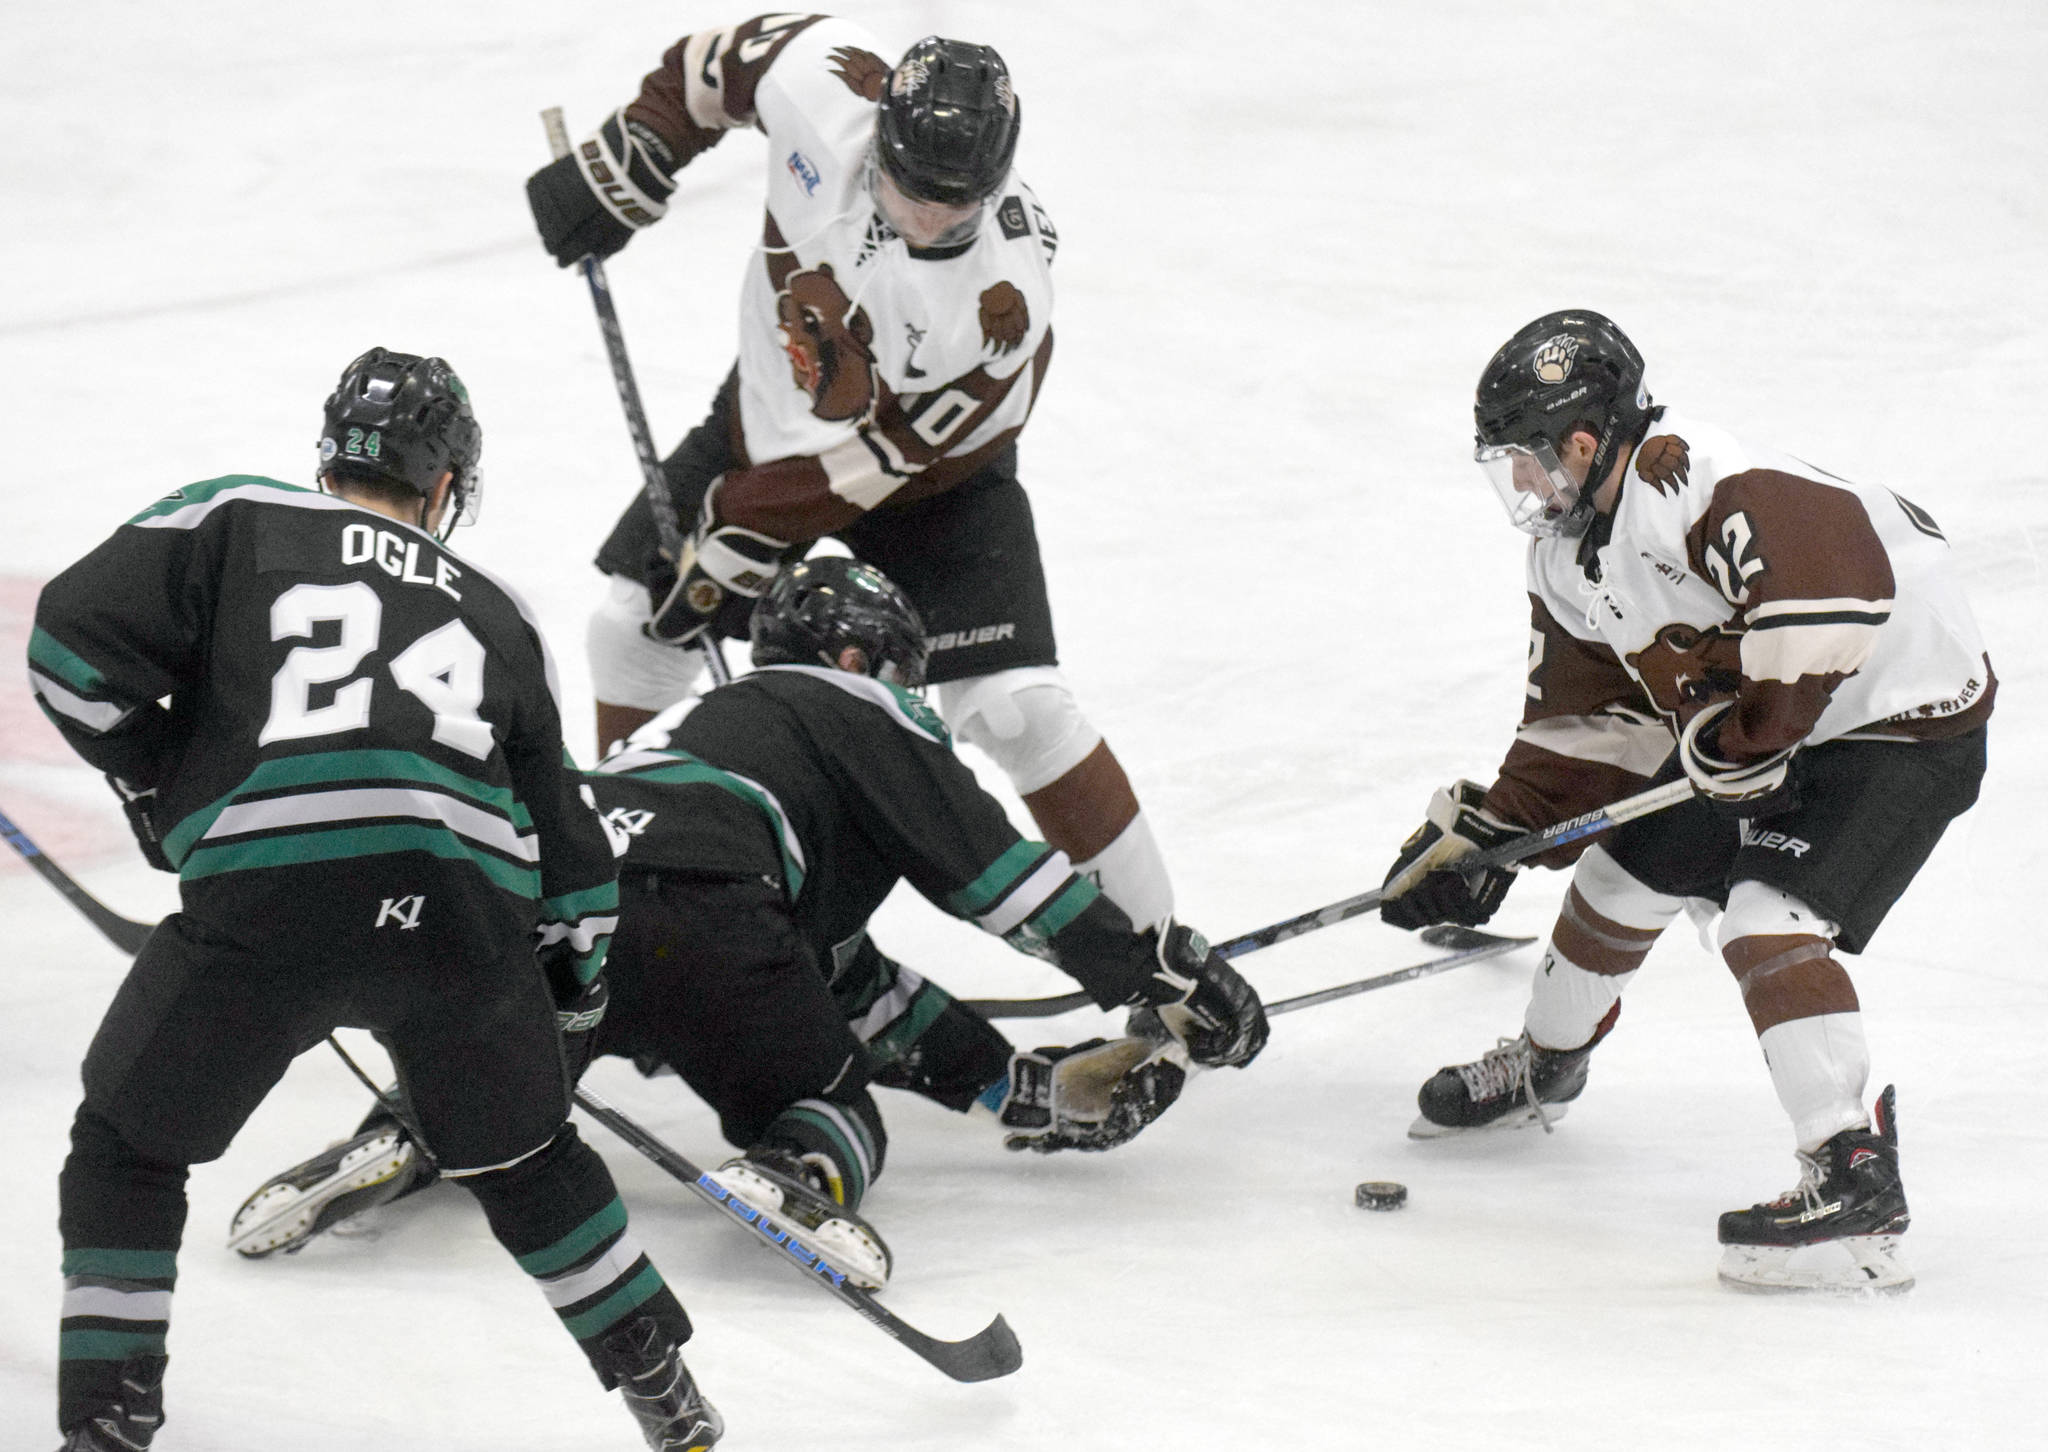 Kenai River Brown Bears forwards Laudon Poellinger and Peter Morgan battle with Brendan Ogle and Jaden Grant of the Chippewa (Wisconsin) Steel on Friday, Nov. 8, 2019, at the Soldotna Regional Sports Complex in Soldotna, Alaska. (Photo by Jeff Helminiak/Peninsula Clarion)